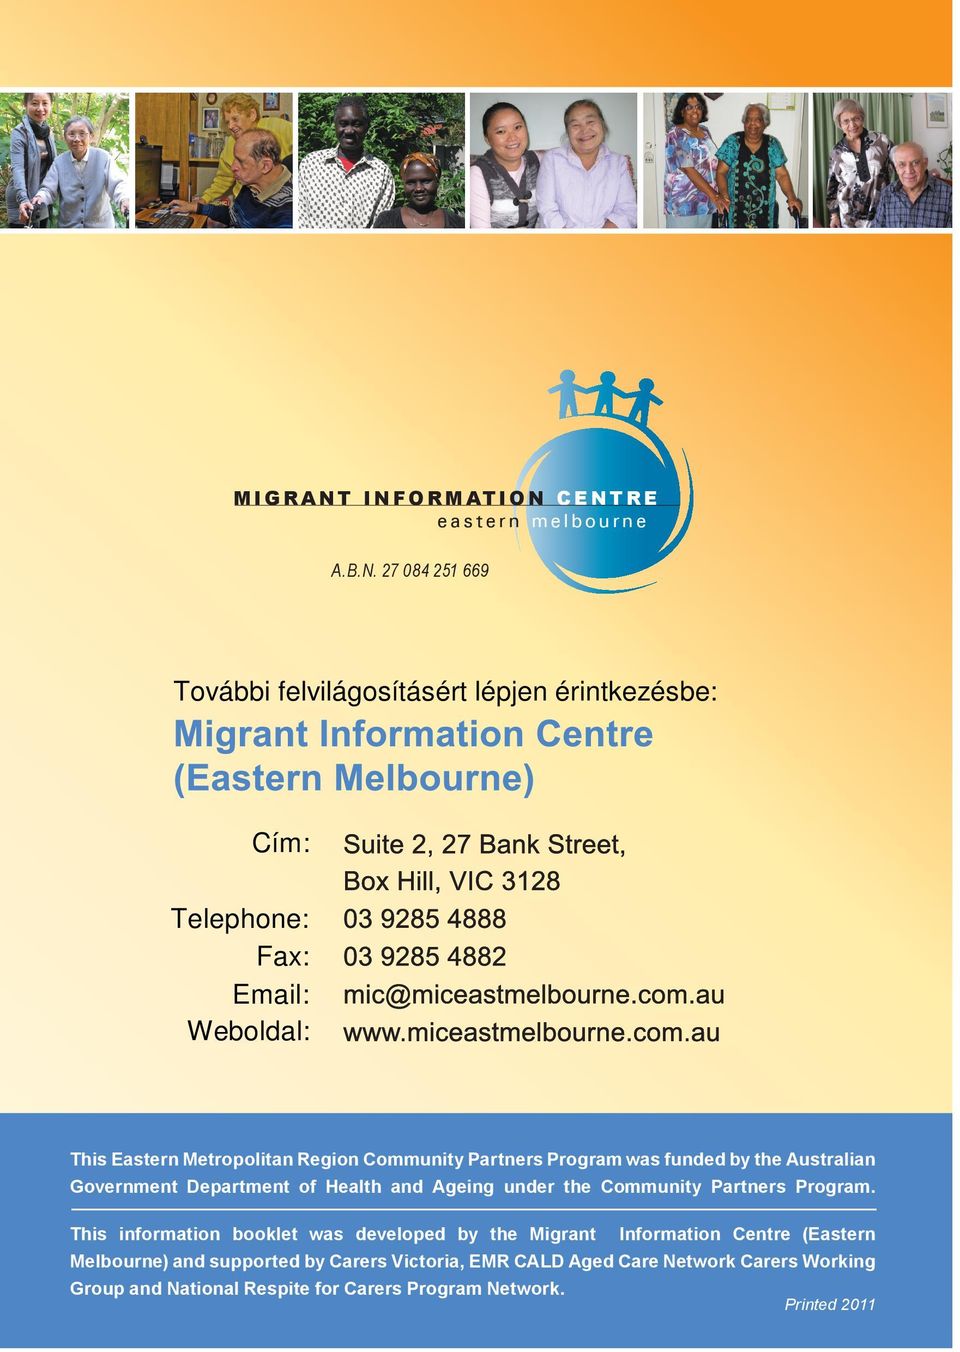 Weboldal: This Eastern Metropolitan Region Community Partners Program was funded by the Australian Government Department of Health and